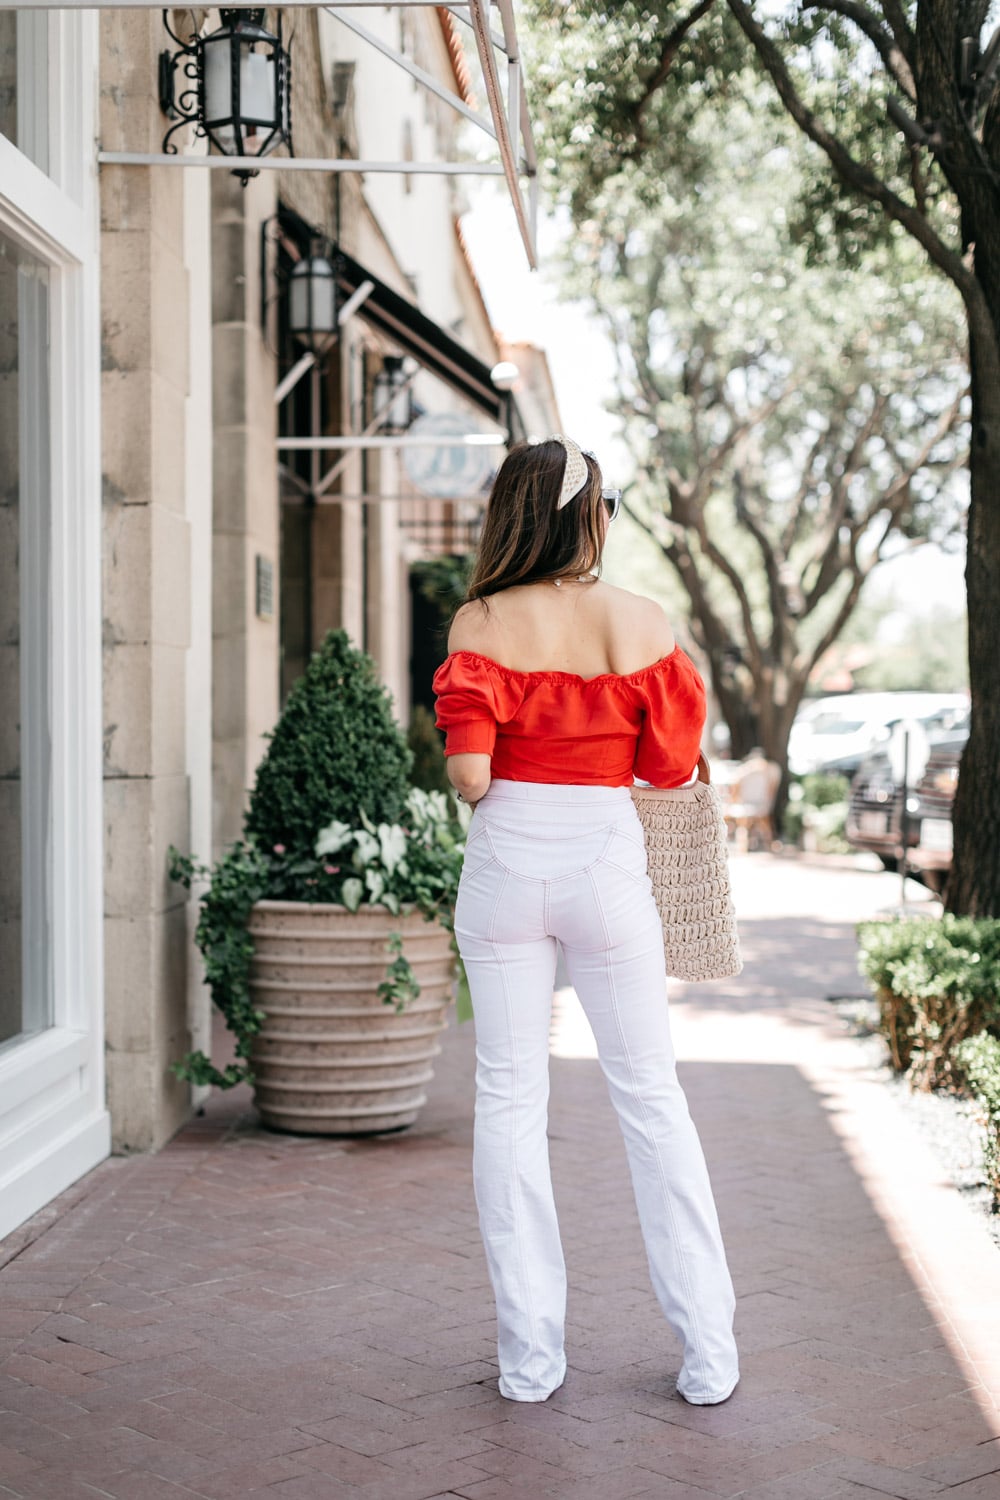 style of sam in what to wear for fourth of july, red puff sleeve top and veronica beard white farrah jeans